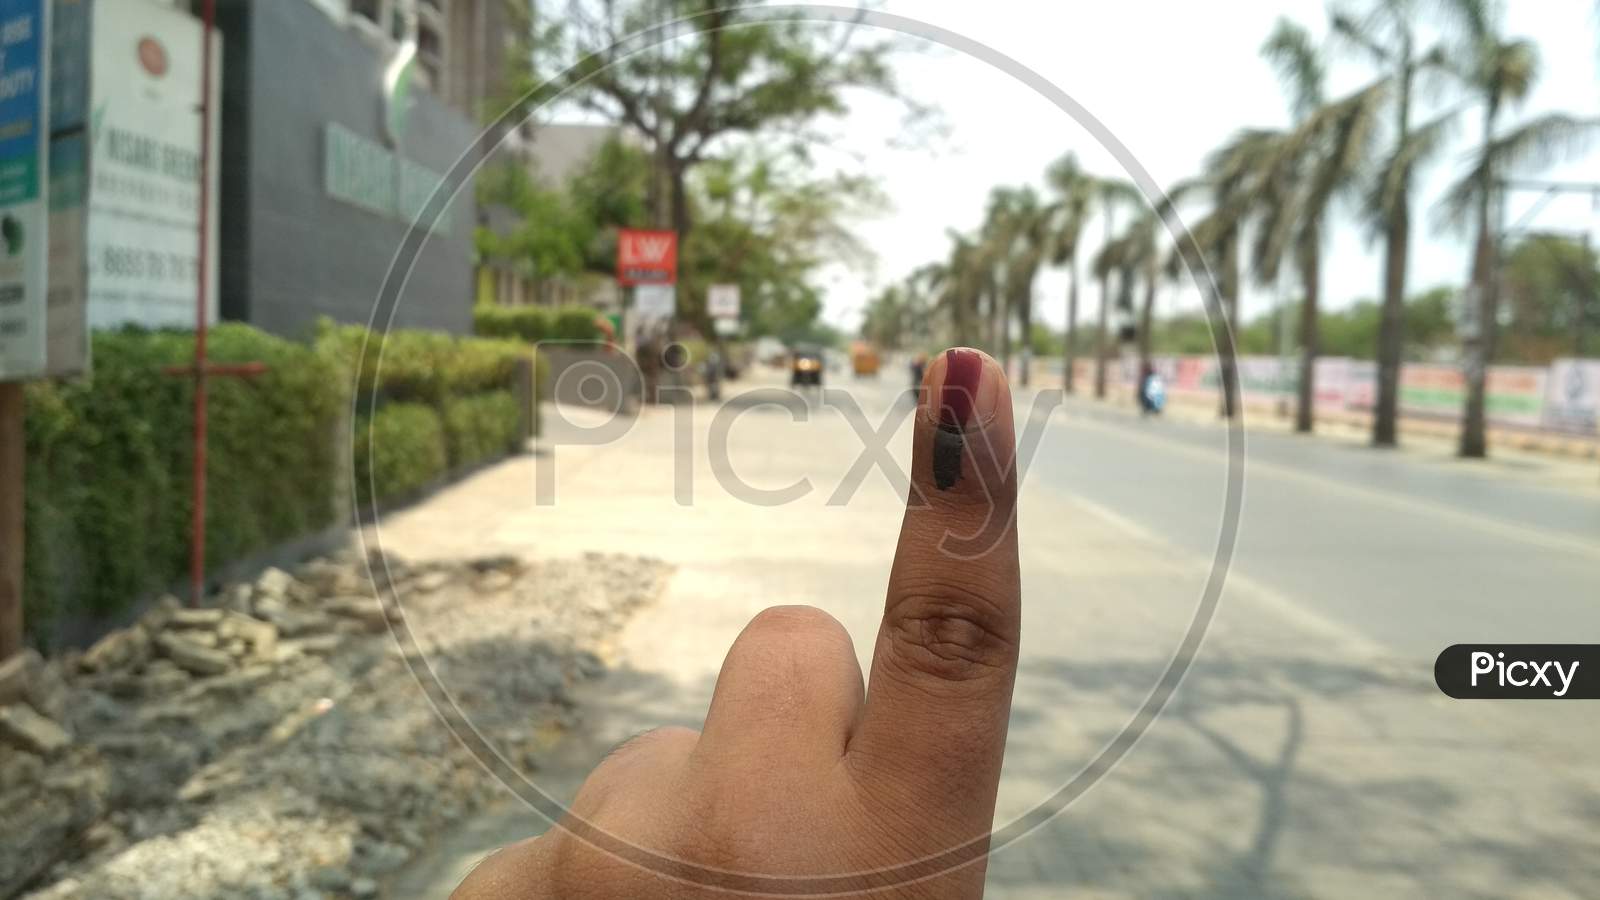 Voting in 2019 assembly elections